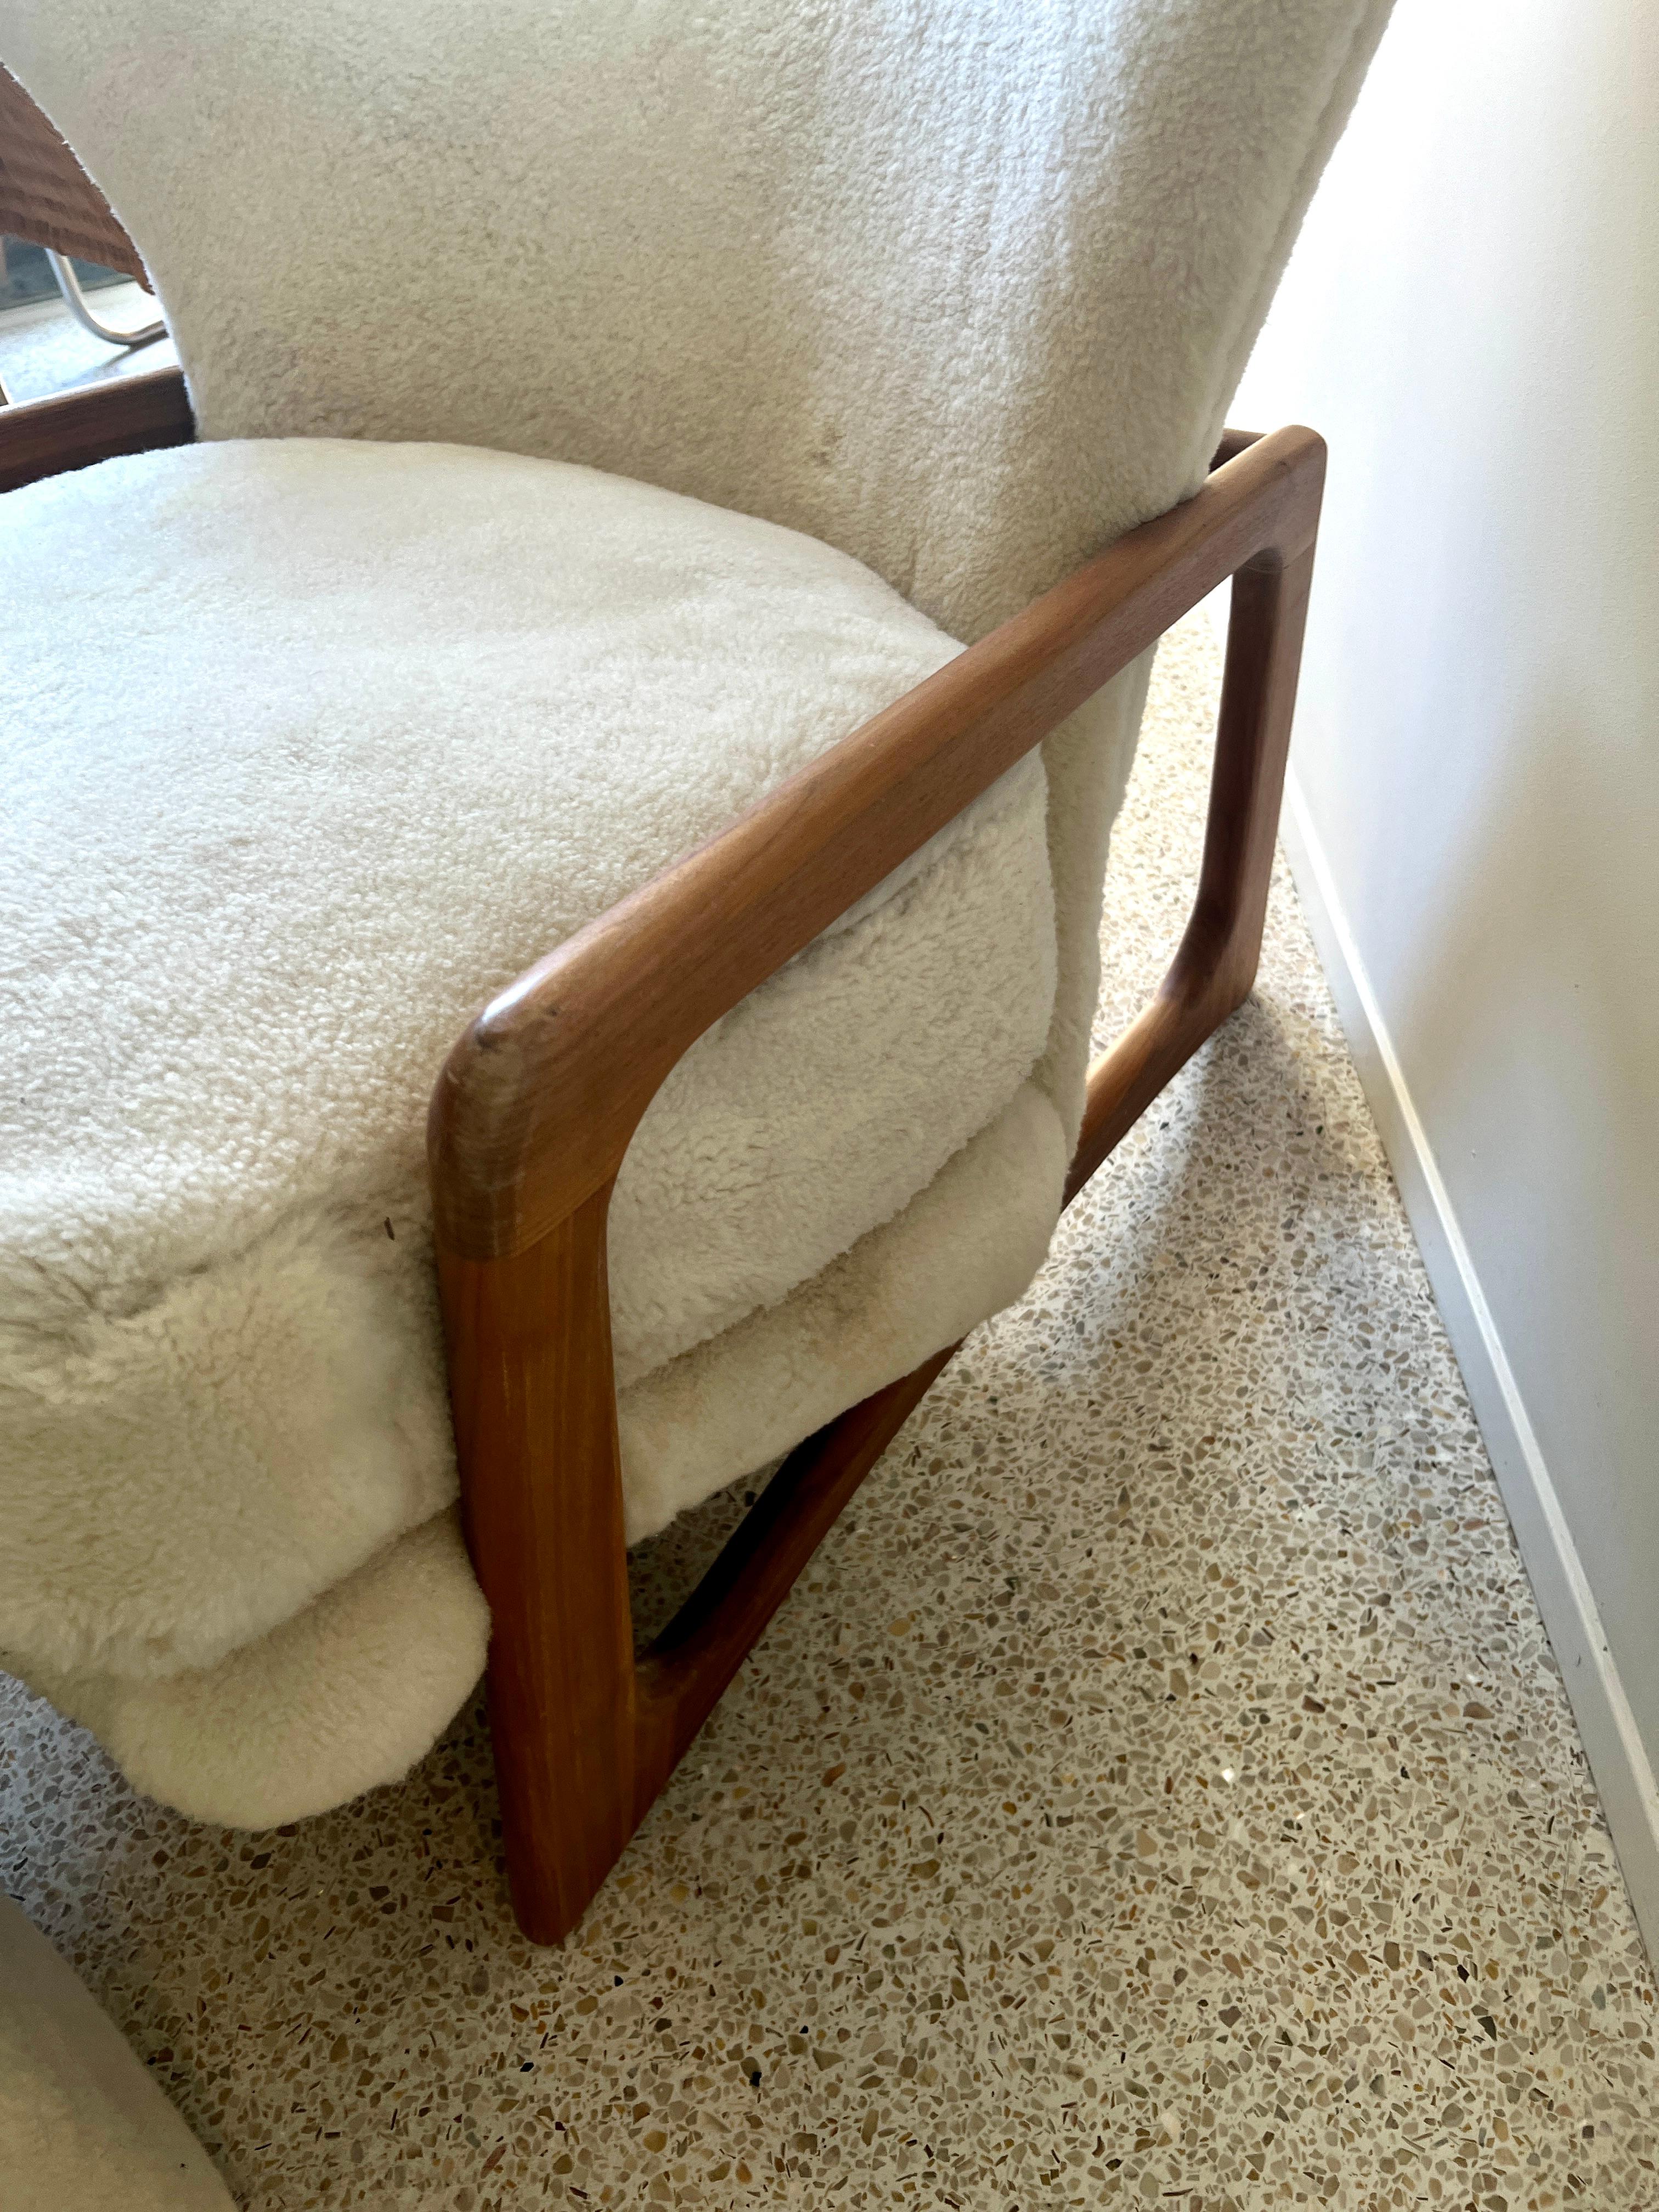 Sheepskin Adrian Pearsall 2466-C Lounge Chair for Craft Associates, 1960s For Sale